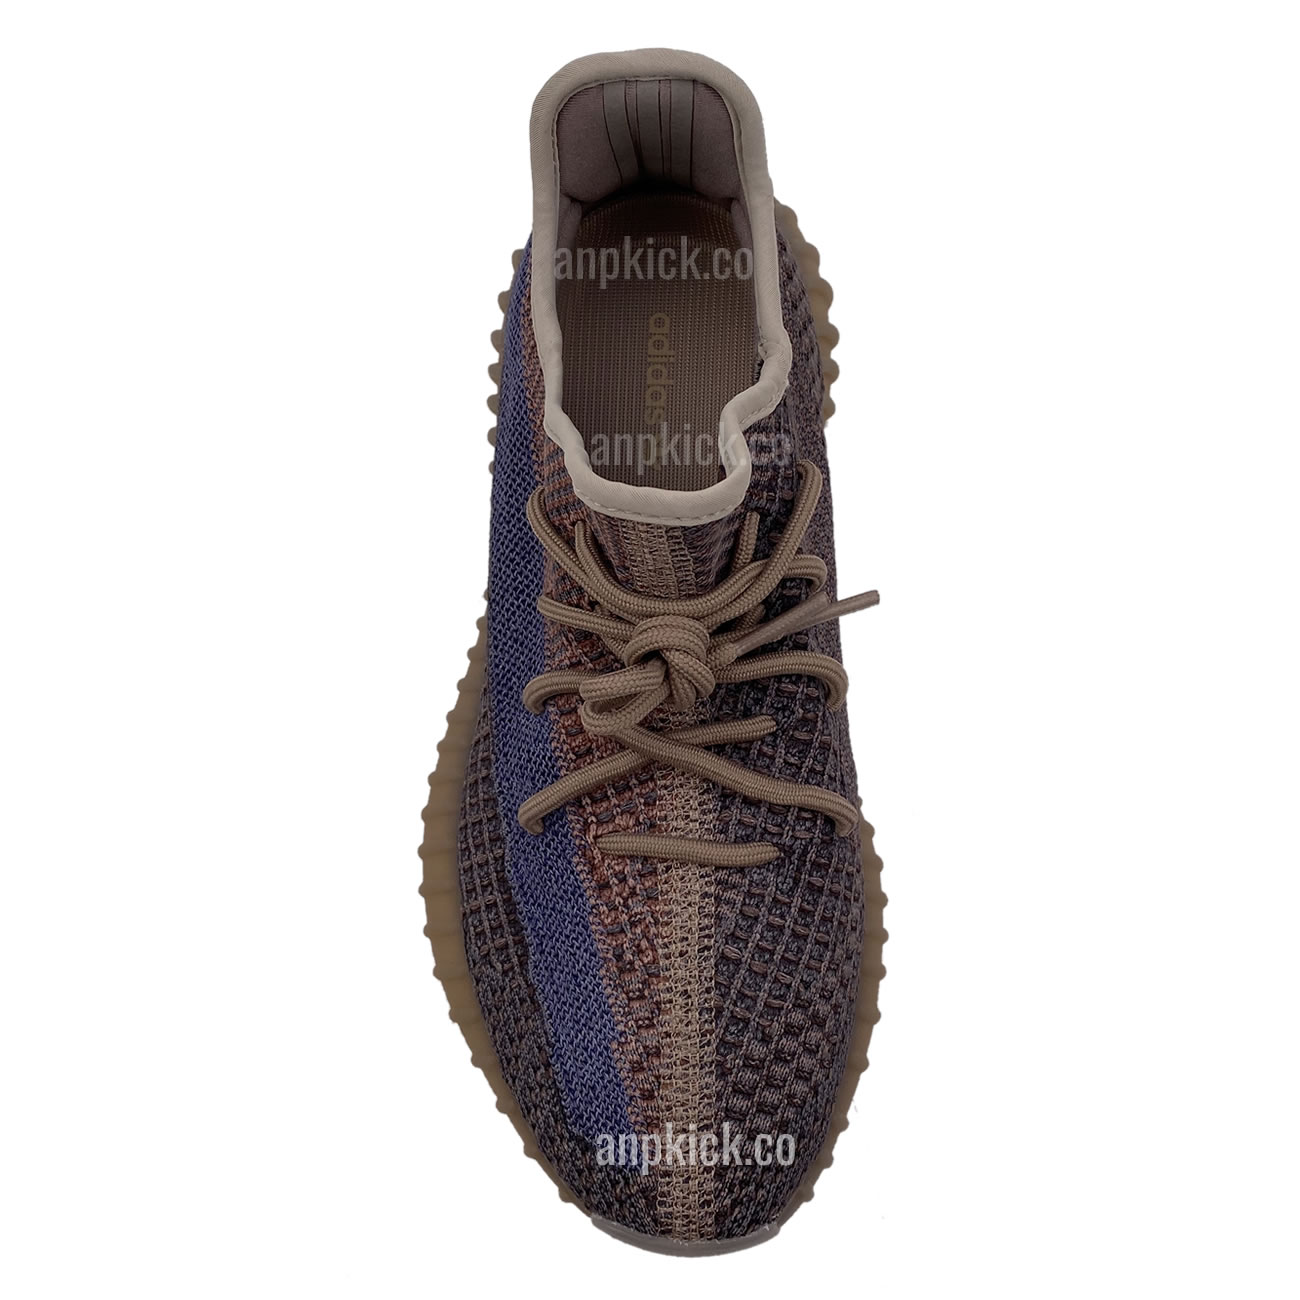 Adidas Yeezy Boost 350 V2 Yecher Ho2795 New Release Date First Look (9) - www.newkick.org